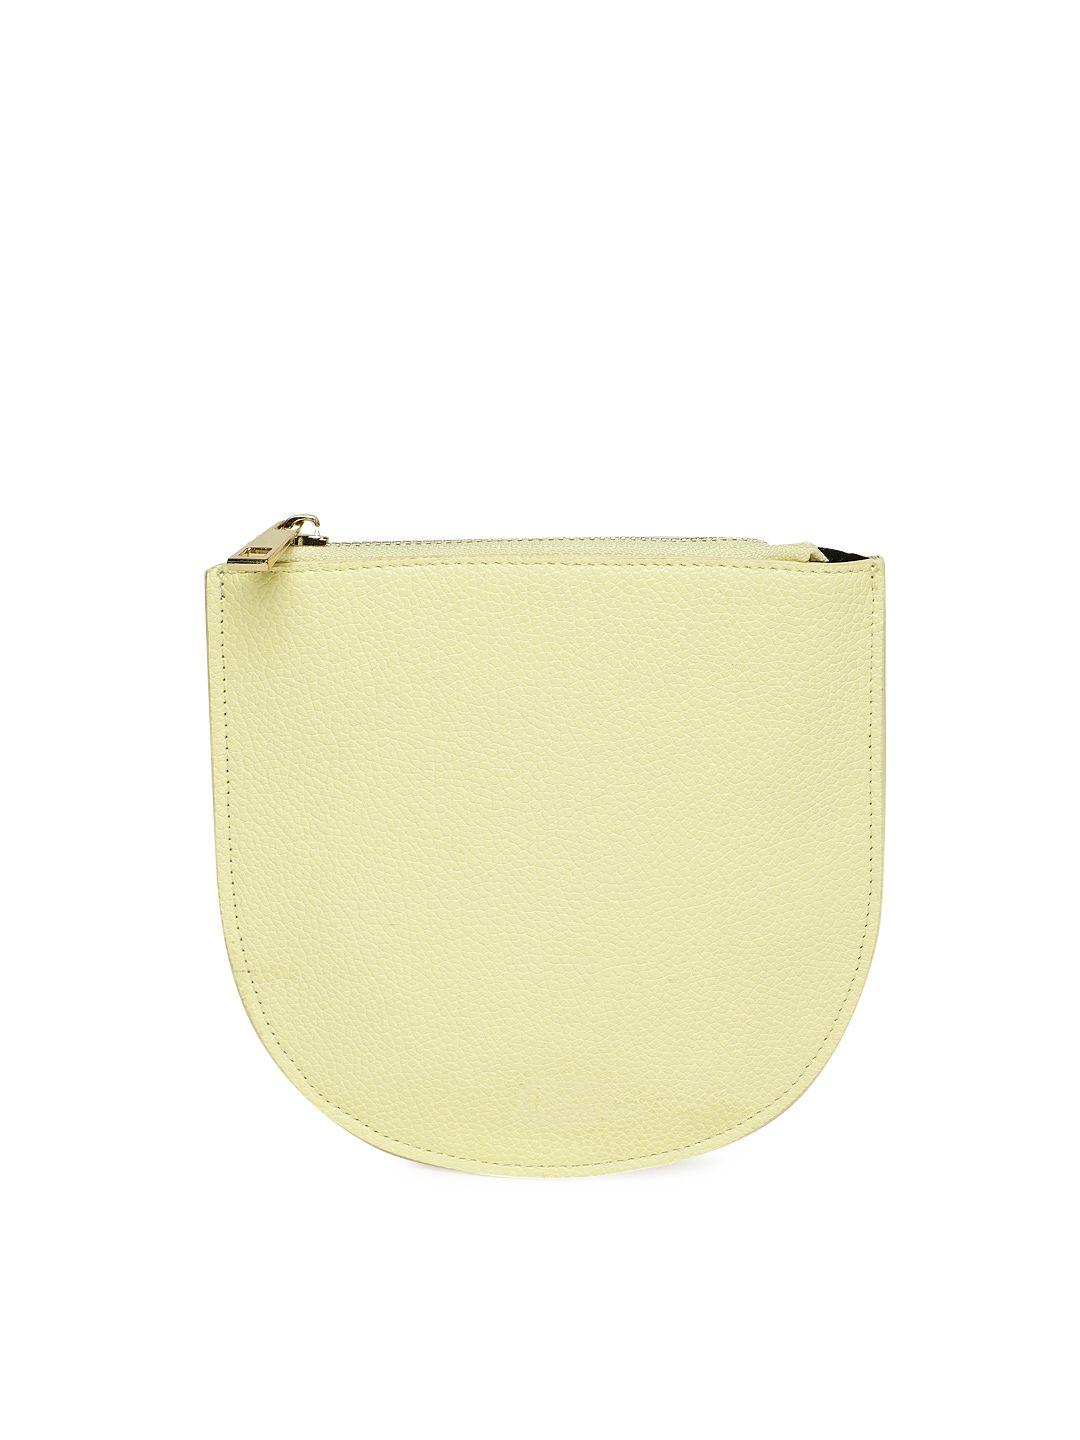 forever 21 yellow solid clutch